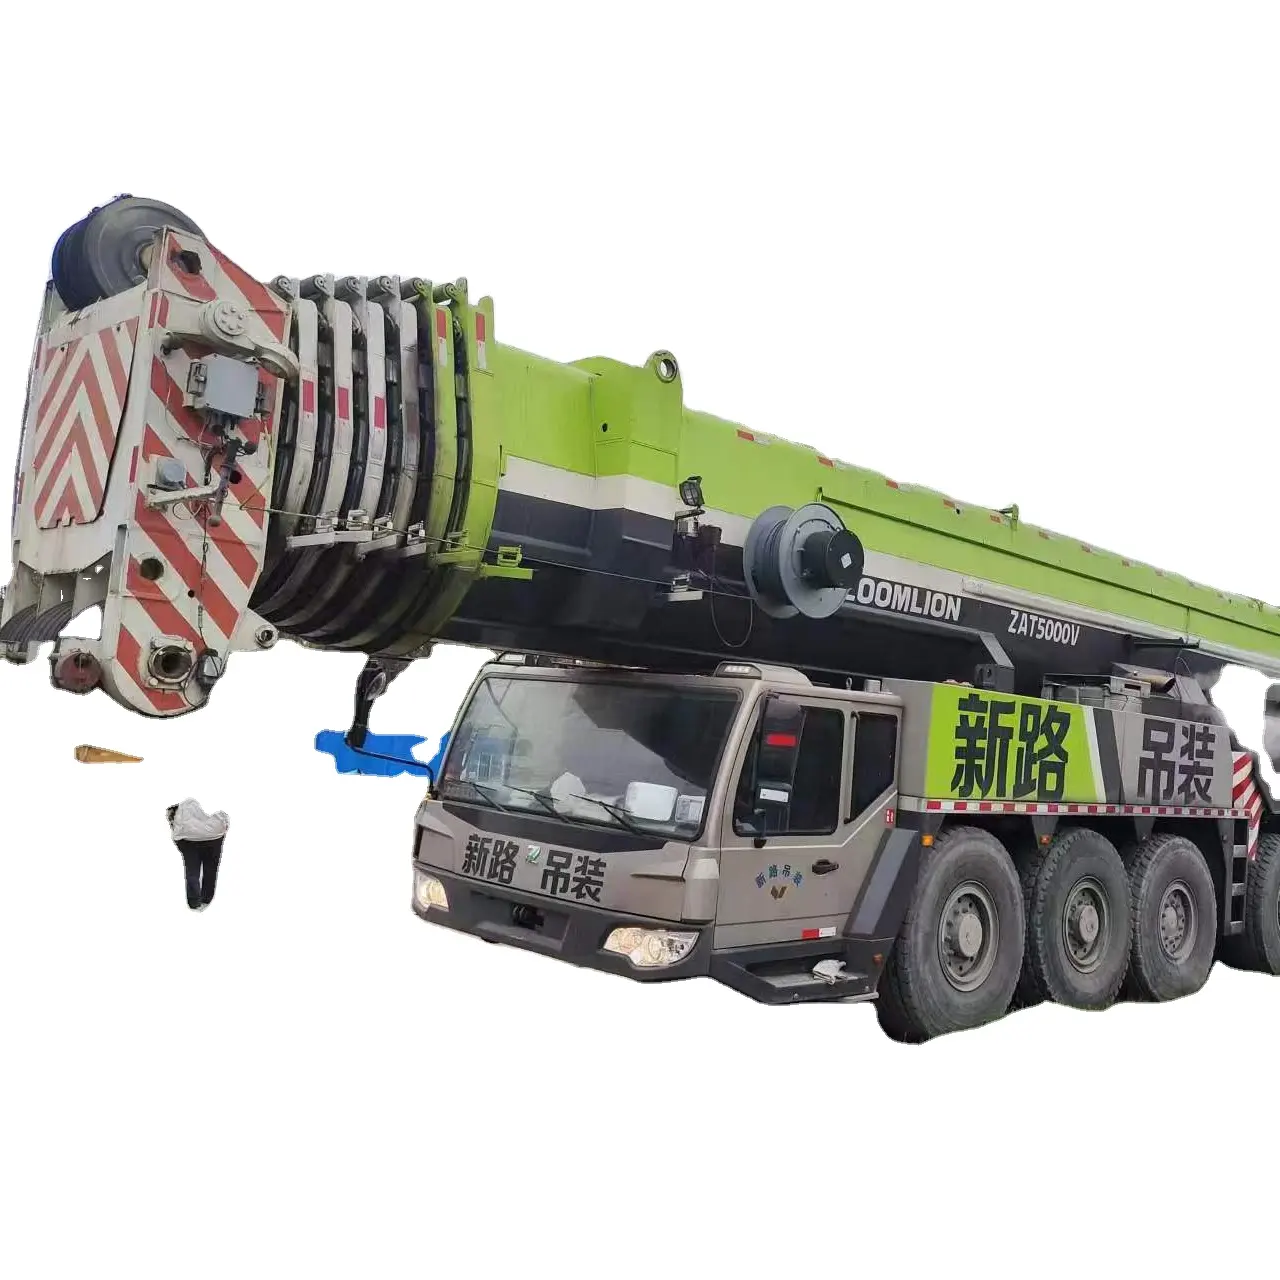 Zoomlion 500Ton used truck crane construction equipment used crane on sale full configuration plus auxiliary arm with good condi